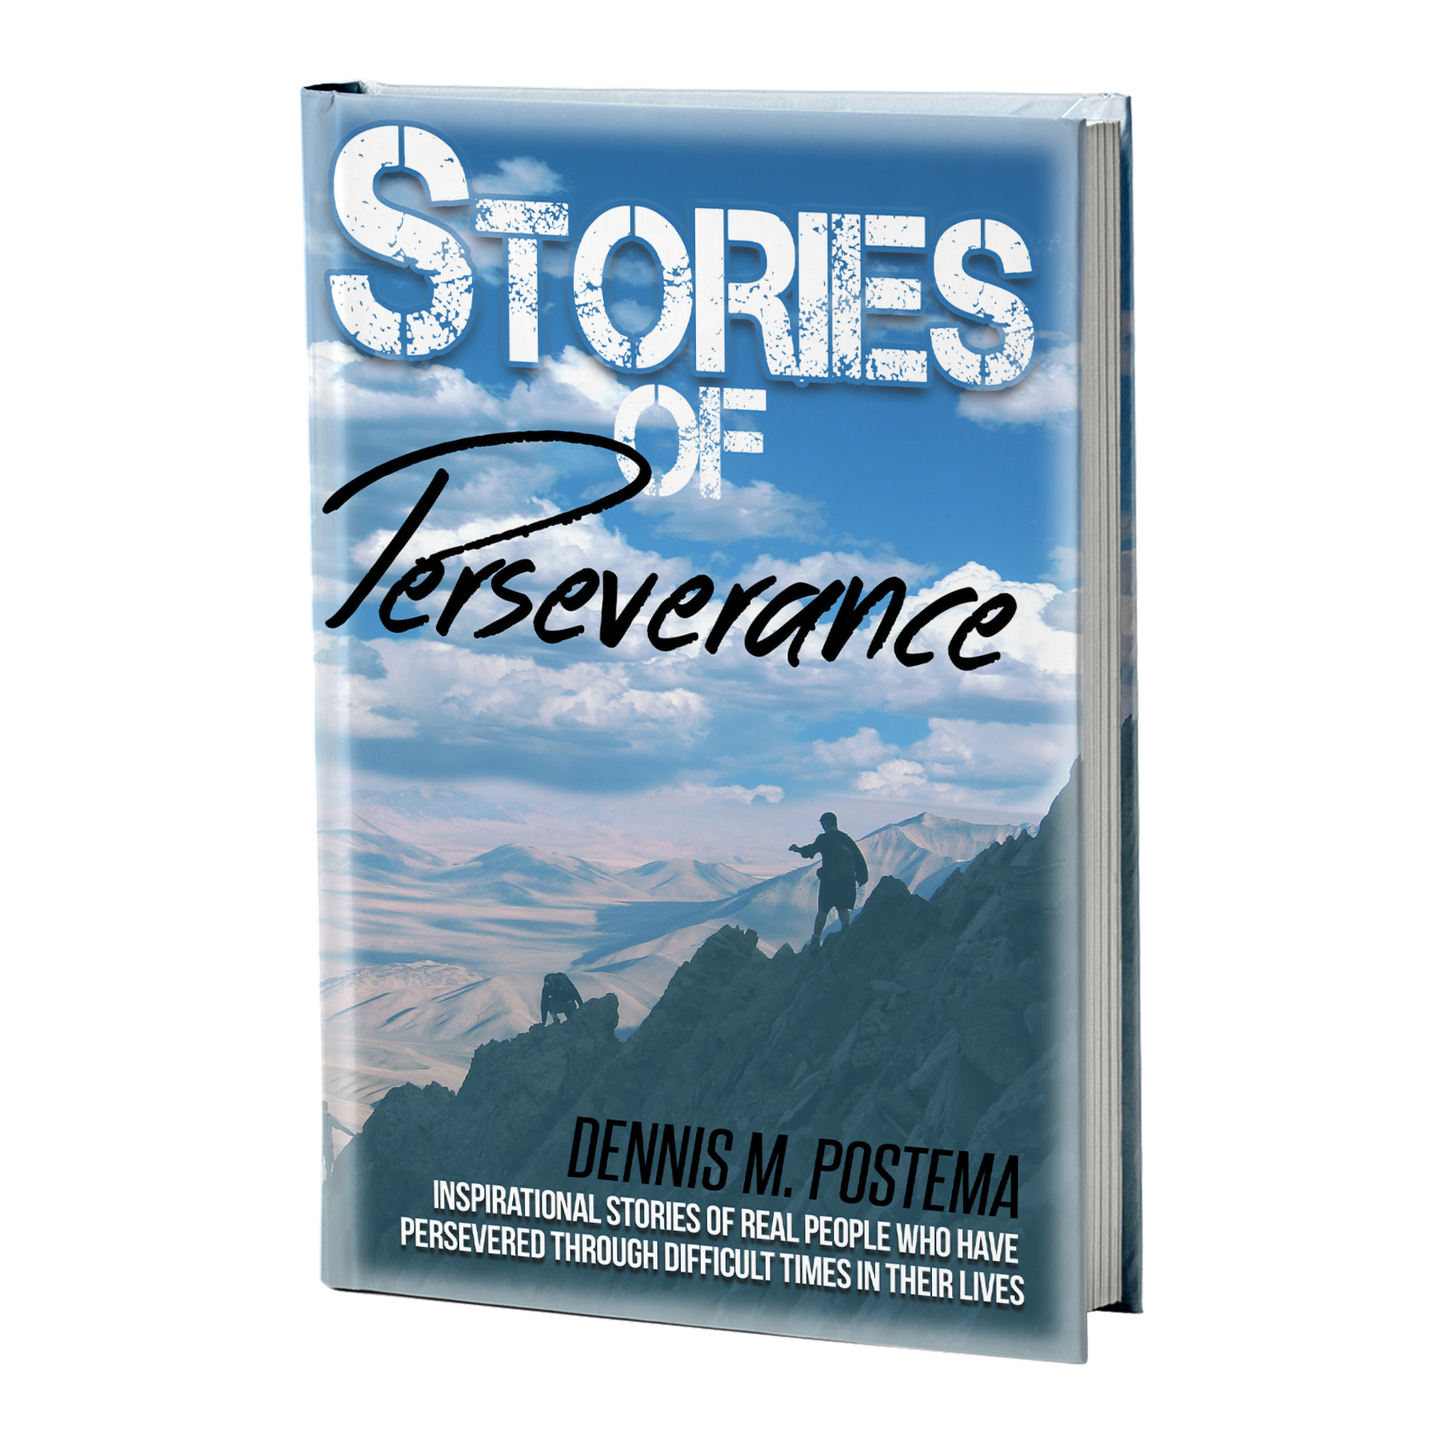 Stories of Perseverance: Inspirational Stories of Real People Who Have Persevered Through Difficult Times in Their Lives